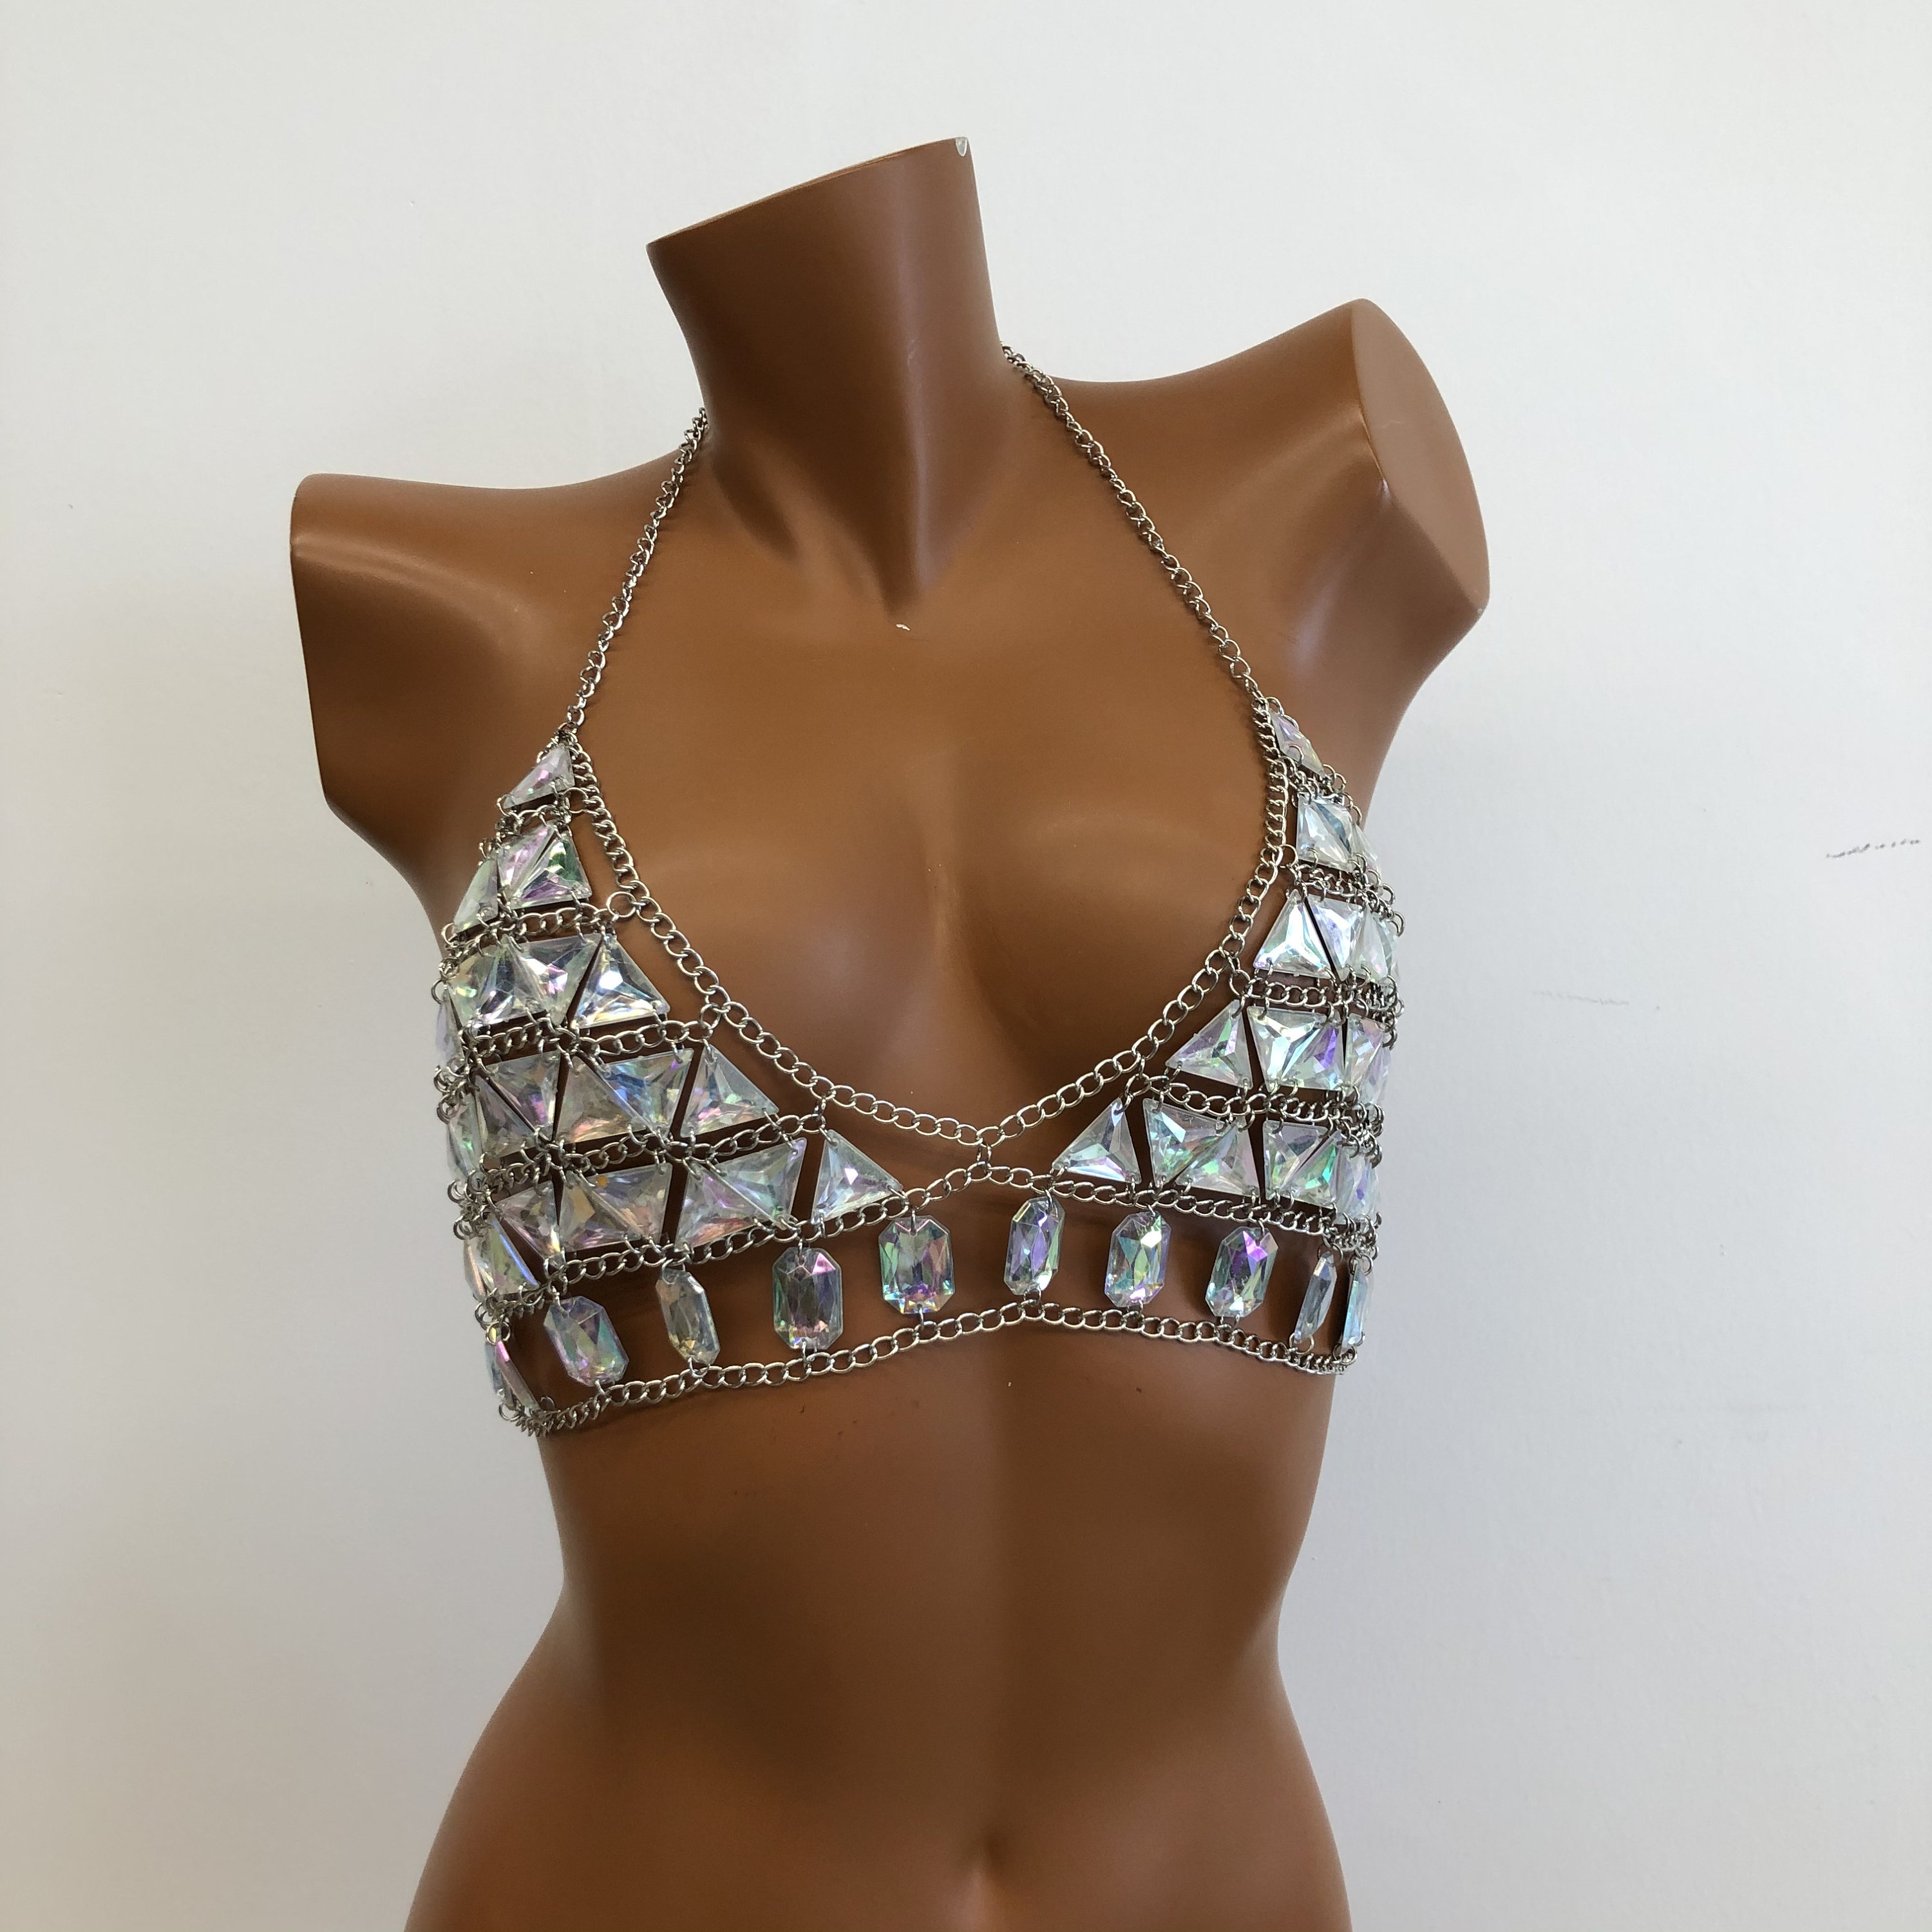 Women's Crystal Rhinestone Body Chain With Netted Mesh And Bralette Style  Crop Top